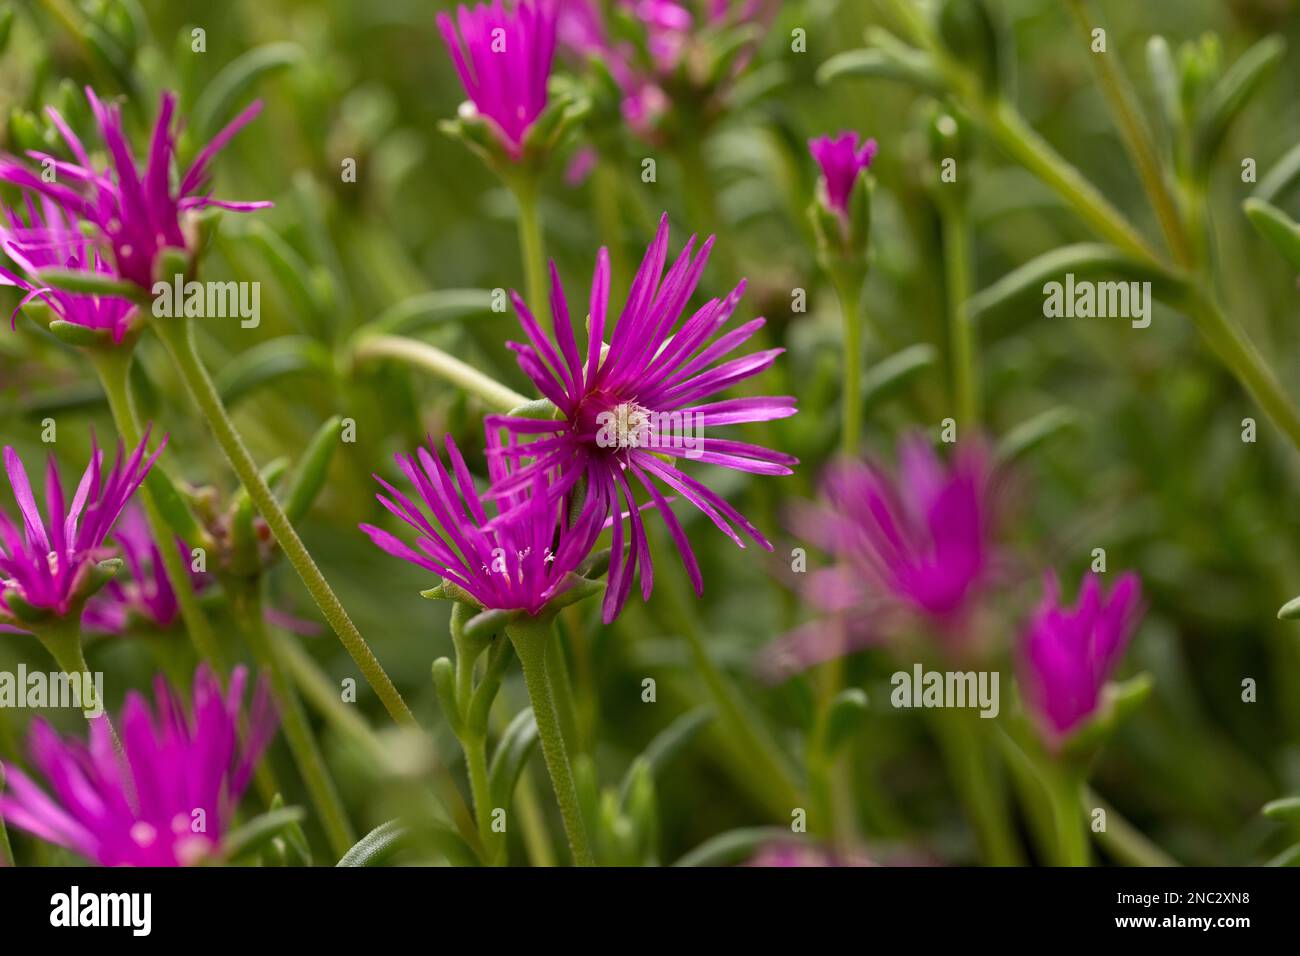 Many beautiful pink flowers of ice plant. Stock Photo